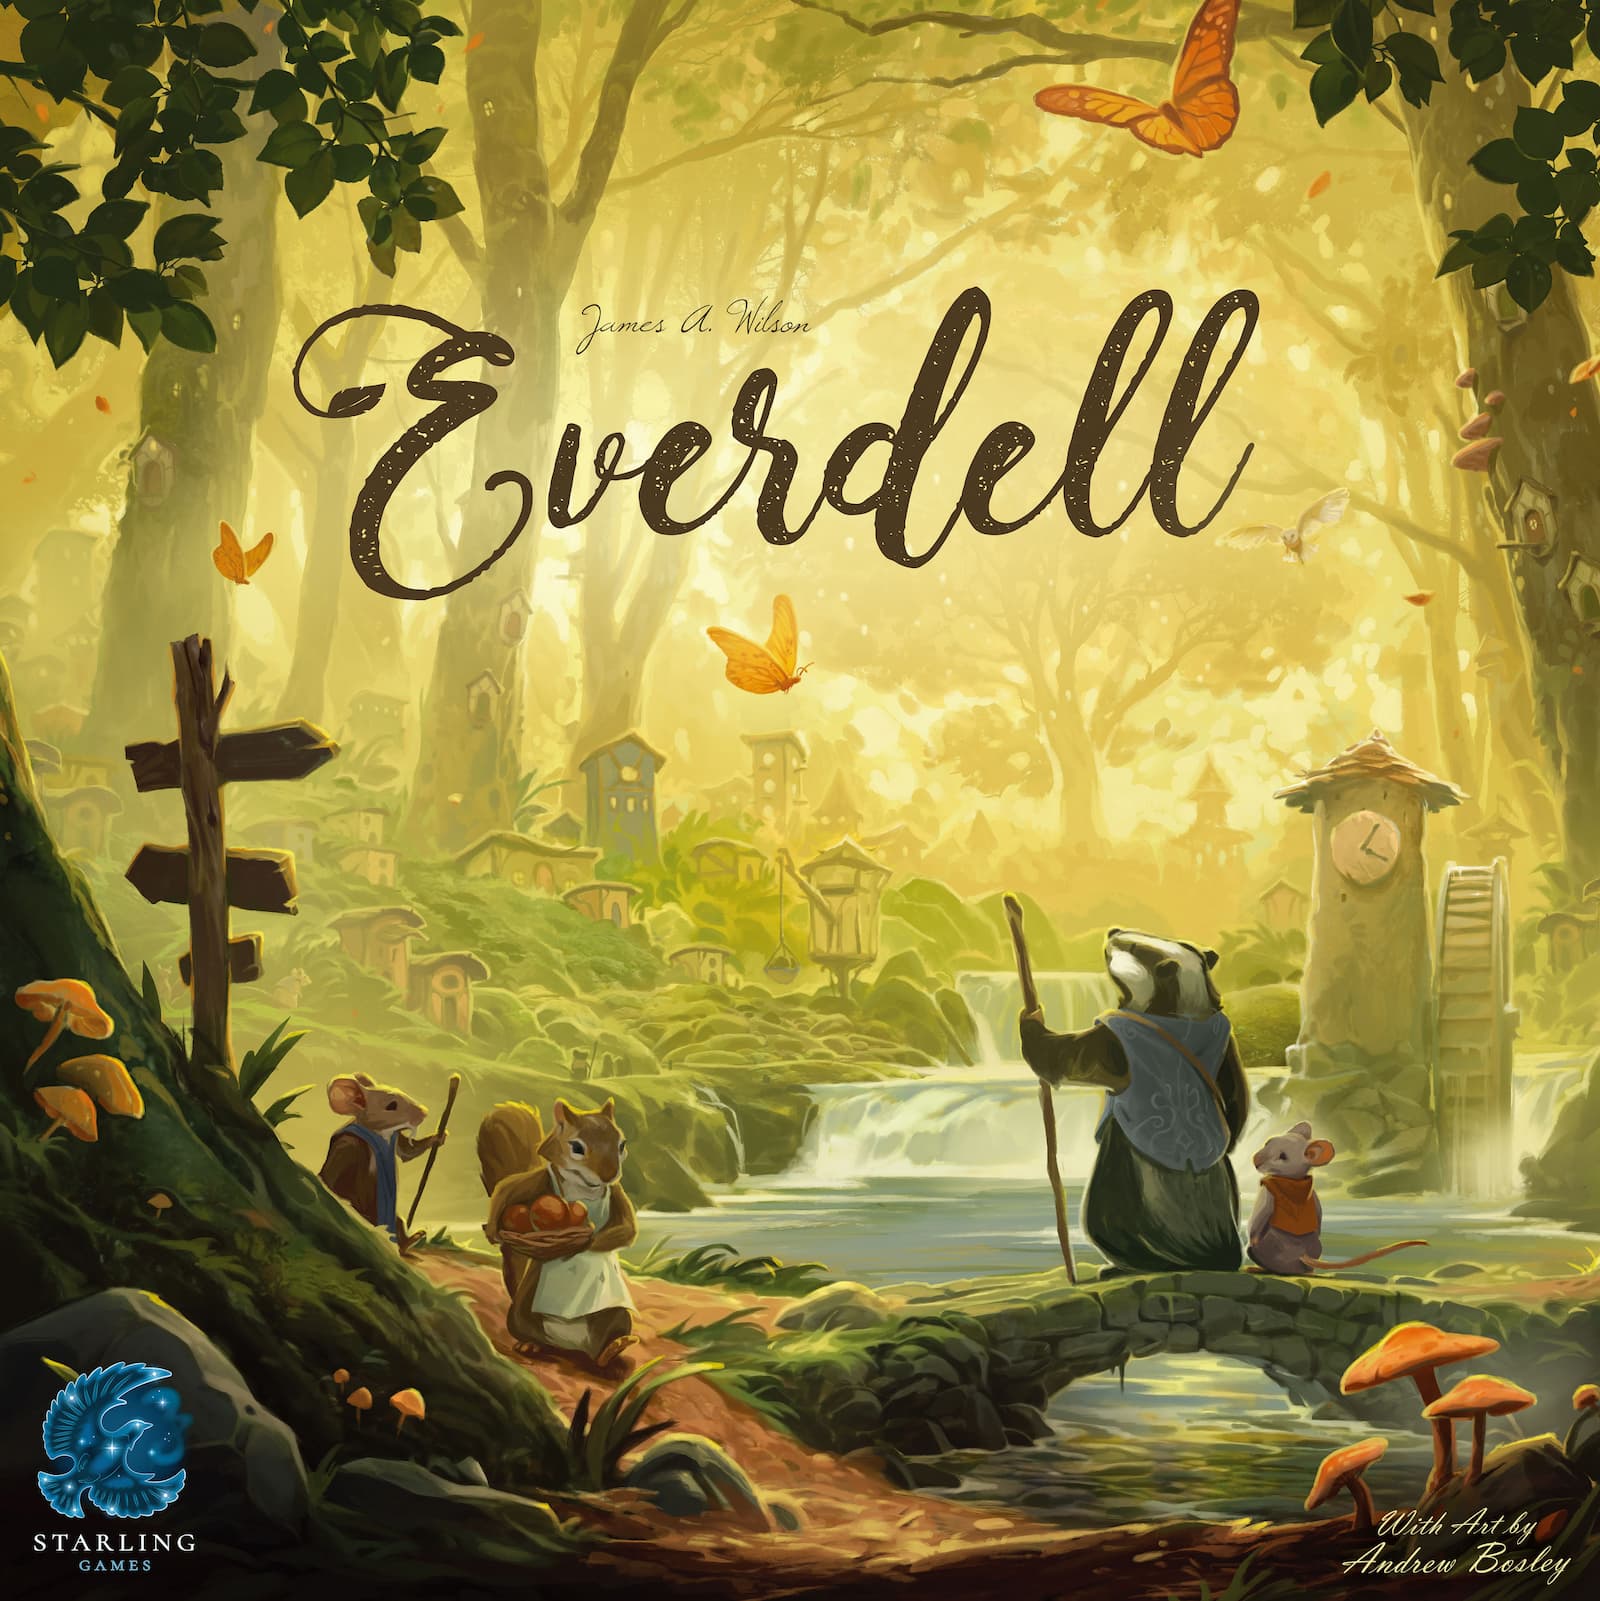 Everdell the board game was manufactured by Boda Games Manufacturing.